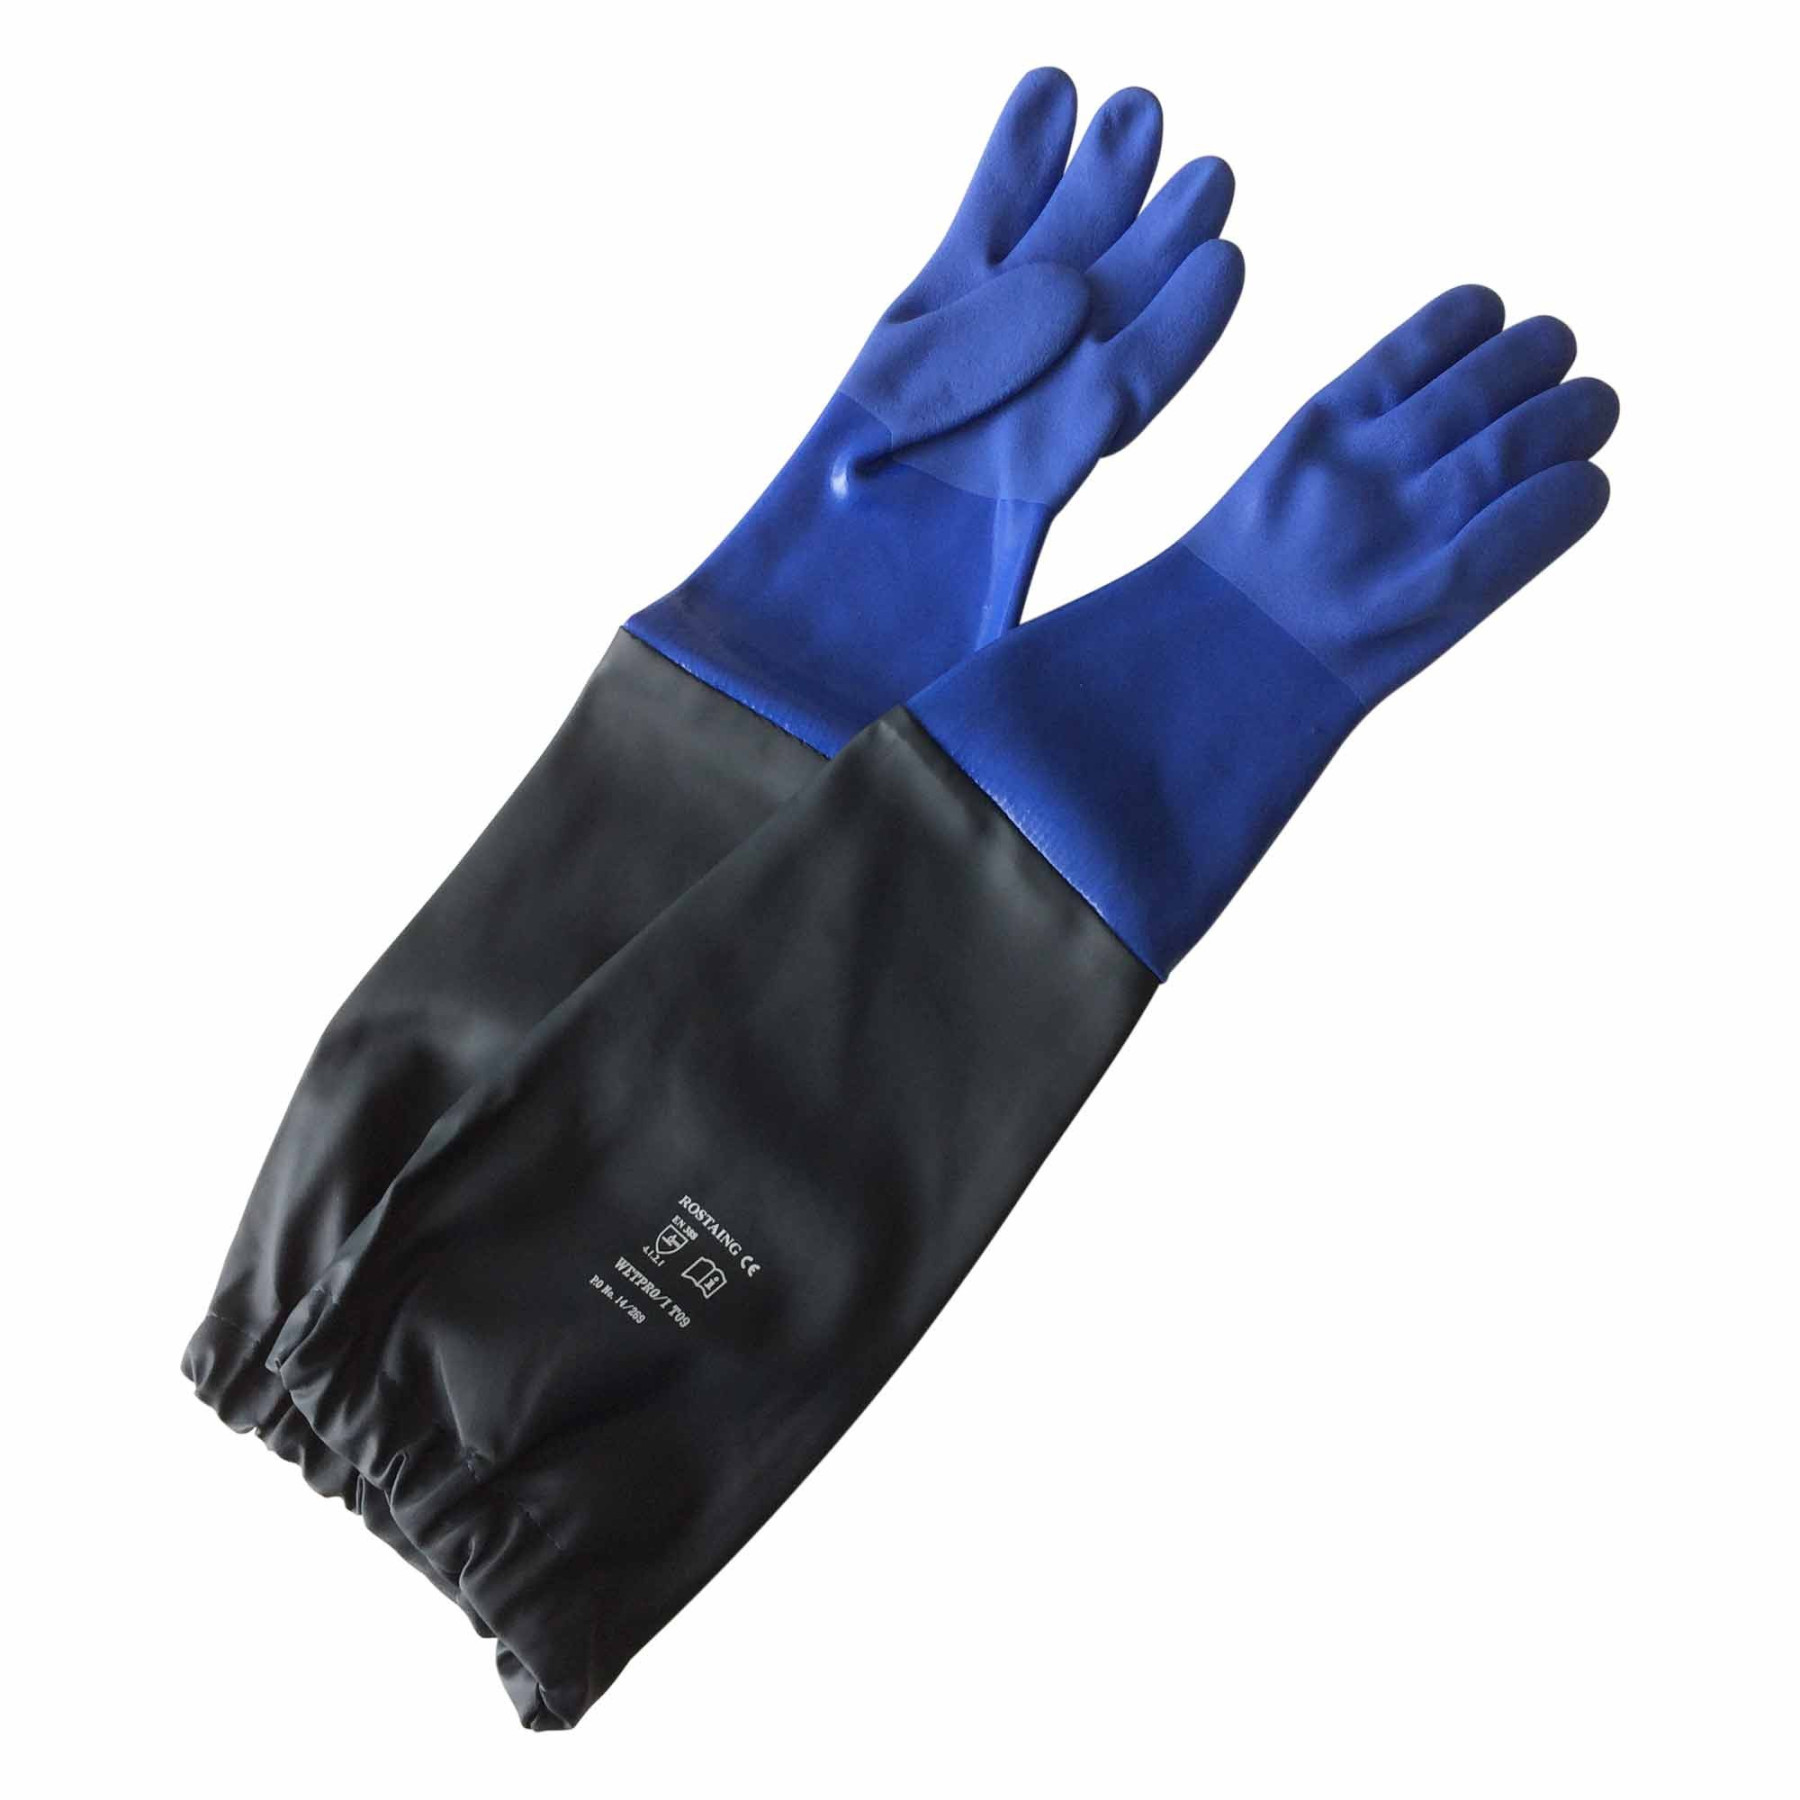 https://media2.burdis.fr/680-thickbox_default/protective-gloves-with-cuff.jpg